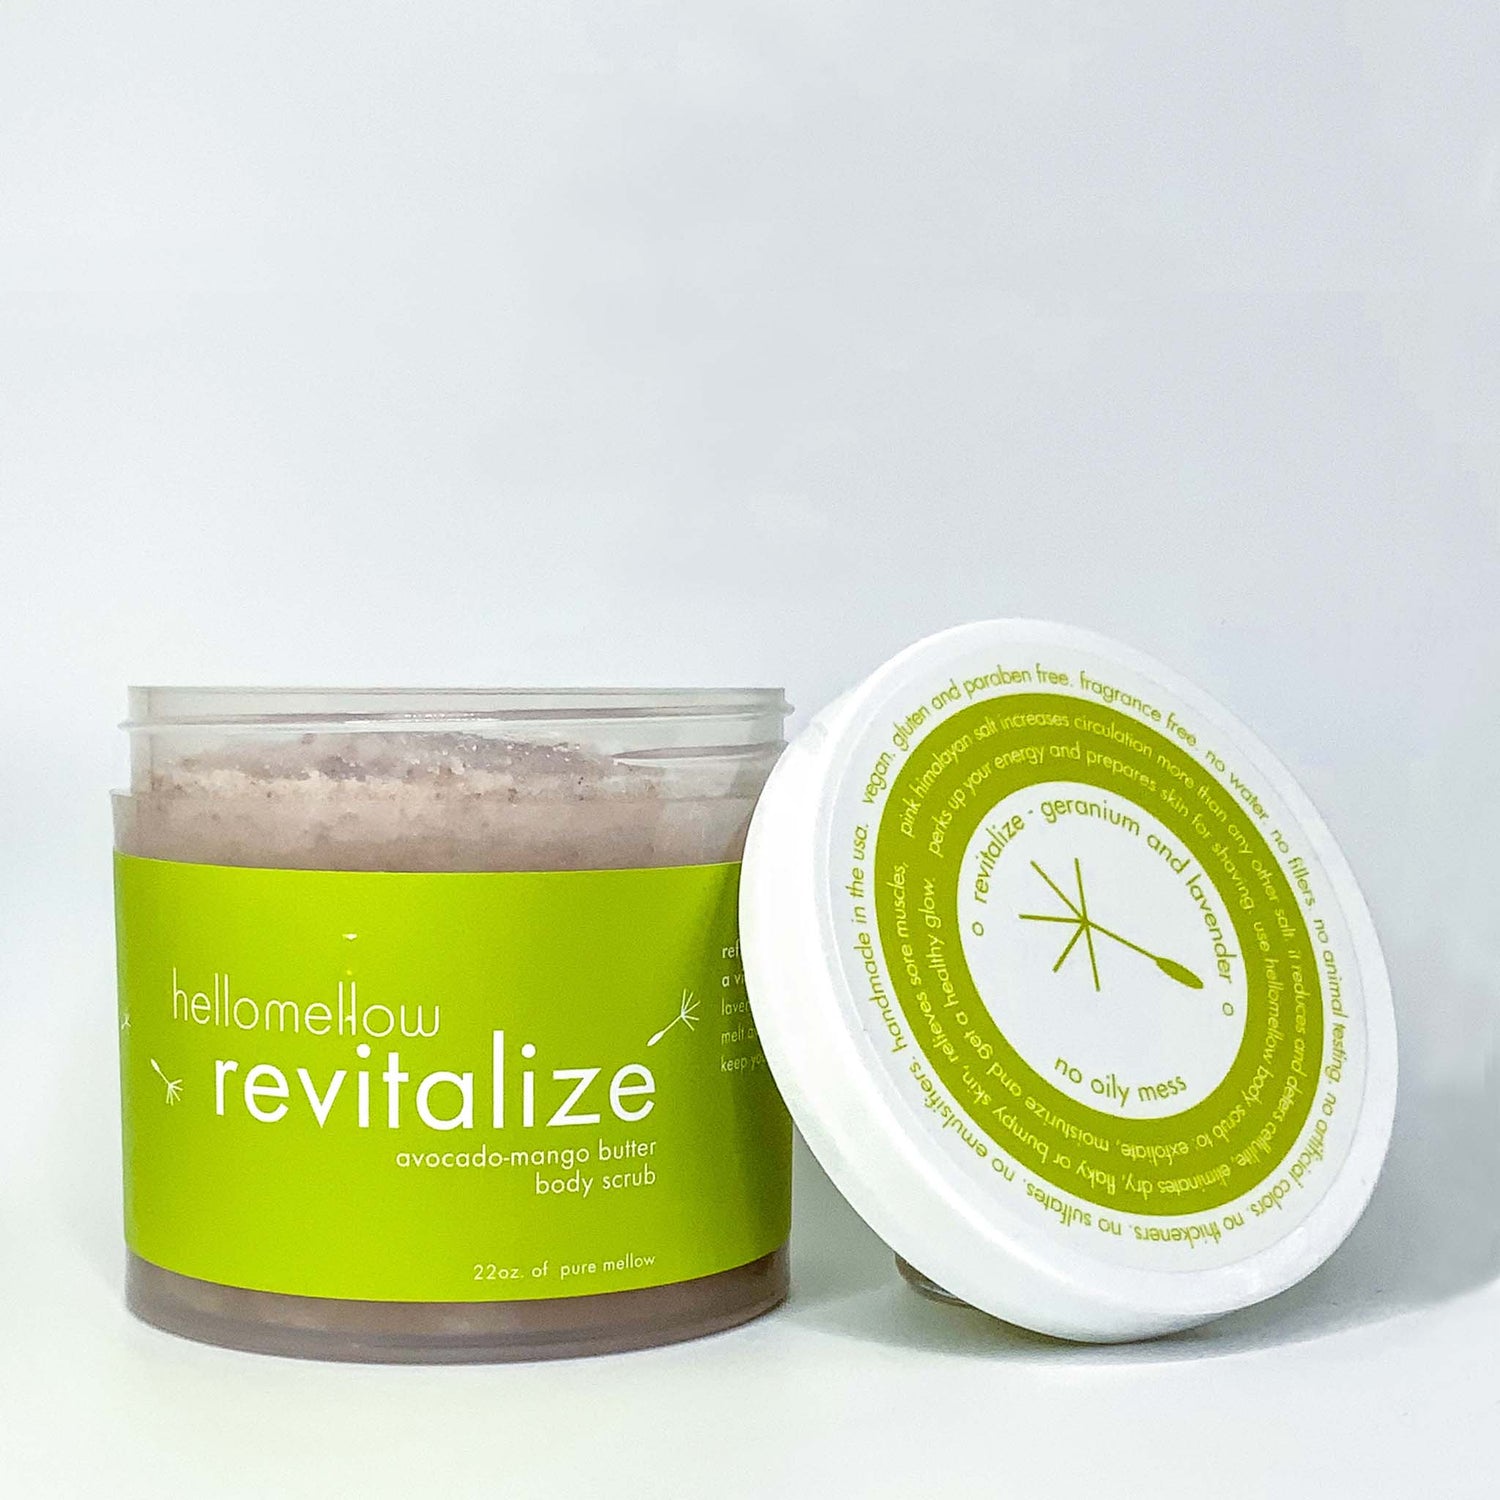 one of everything deluxe - revitalize